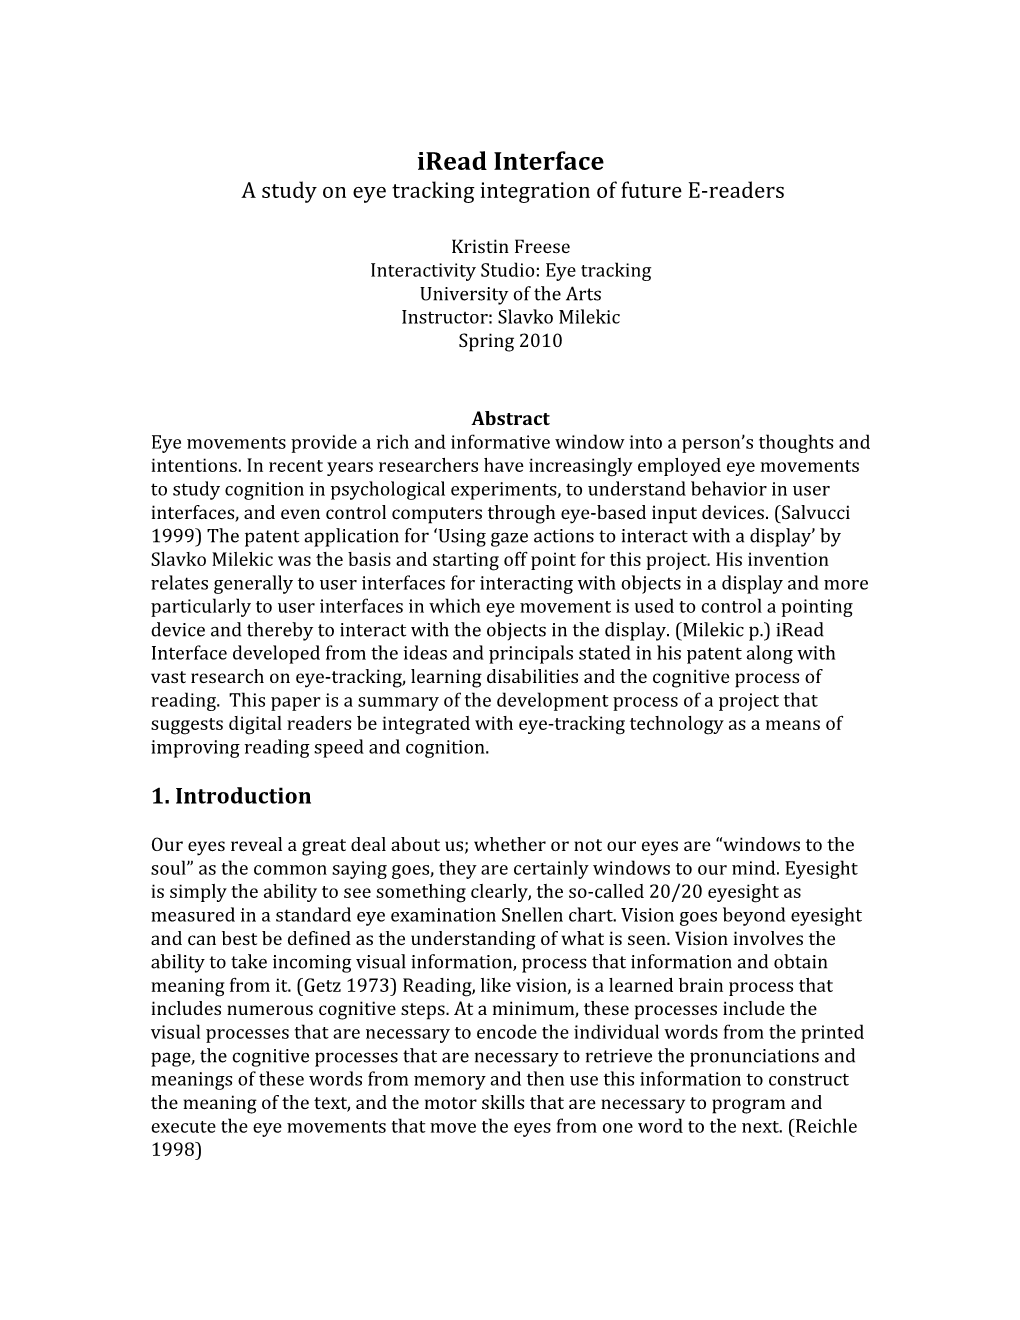 Iread Interface a Study on Eye Tracking Integration of Future E-Readers